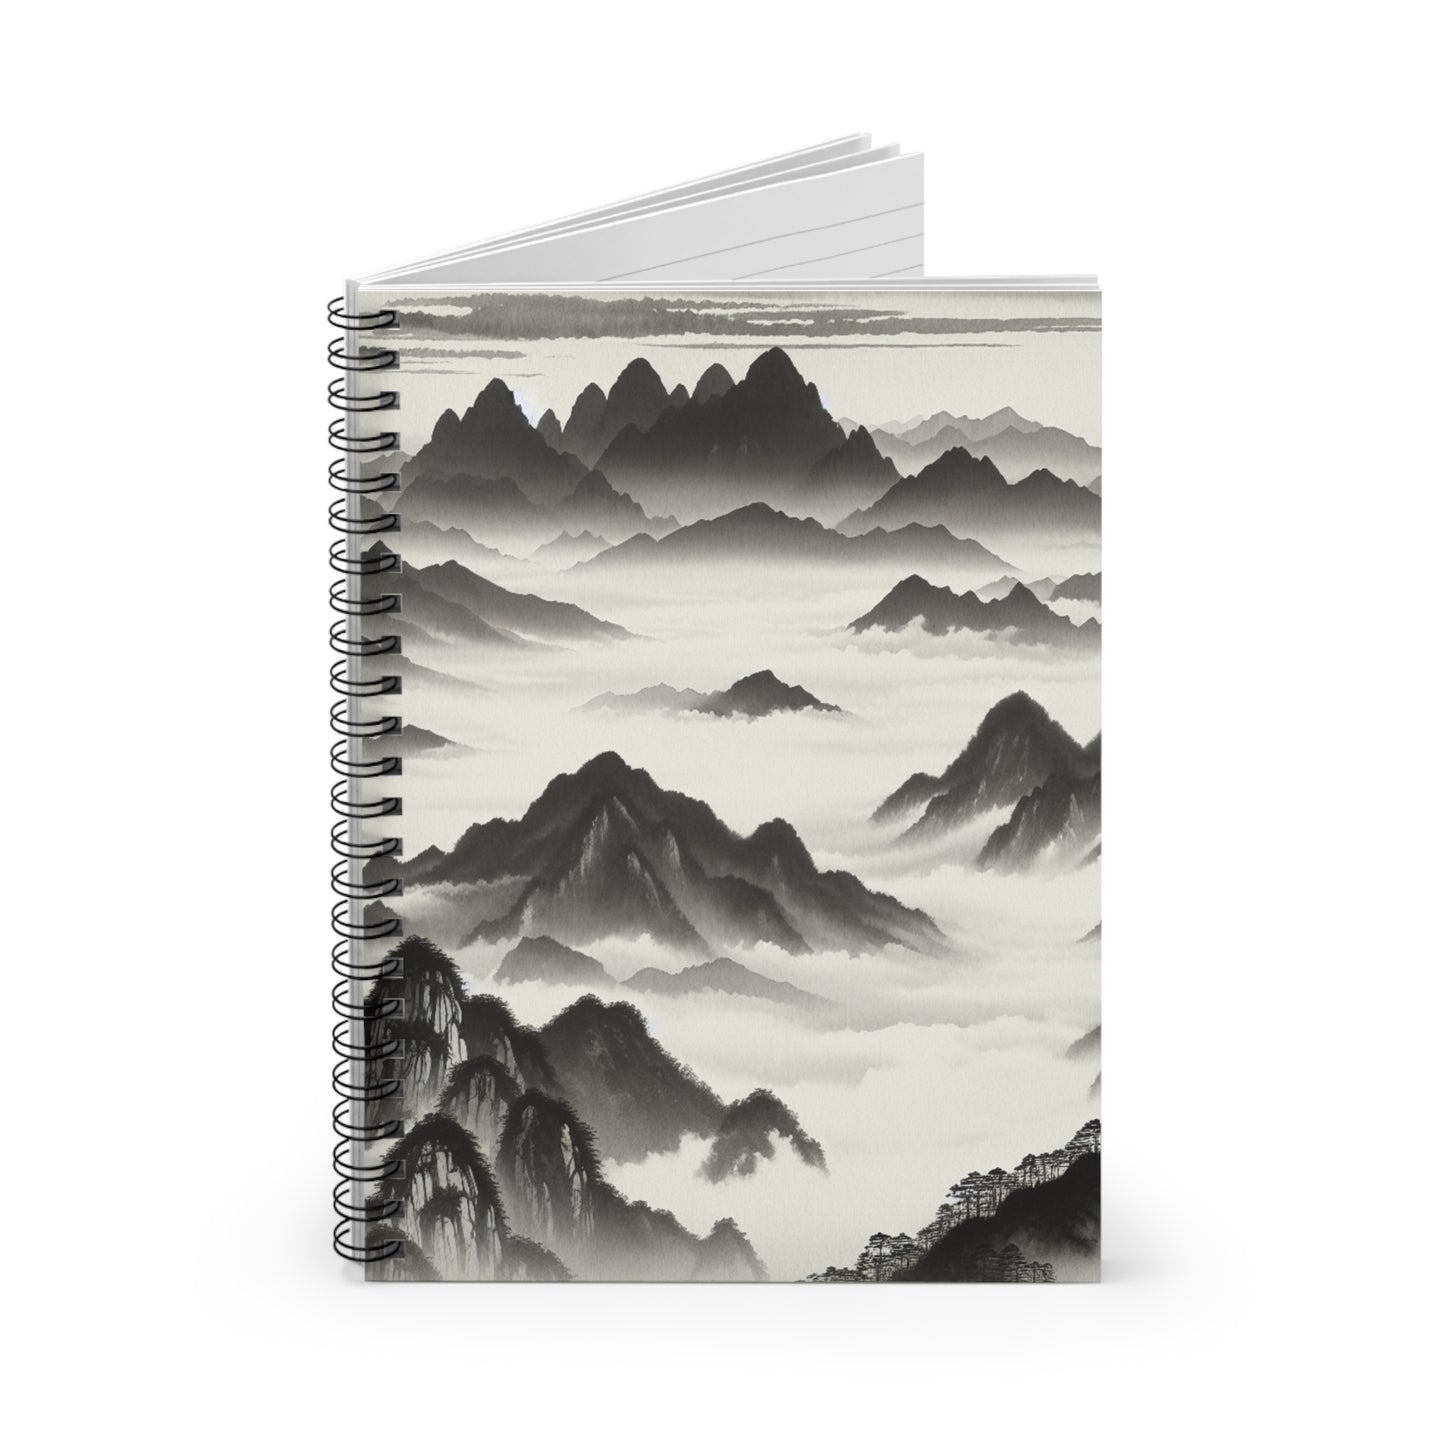 "Misty Peaks in the Fog" - The Alien Spiral Notebook (Ruled Line) Ink Wash Painting Style